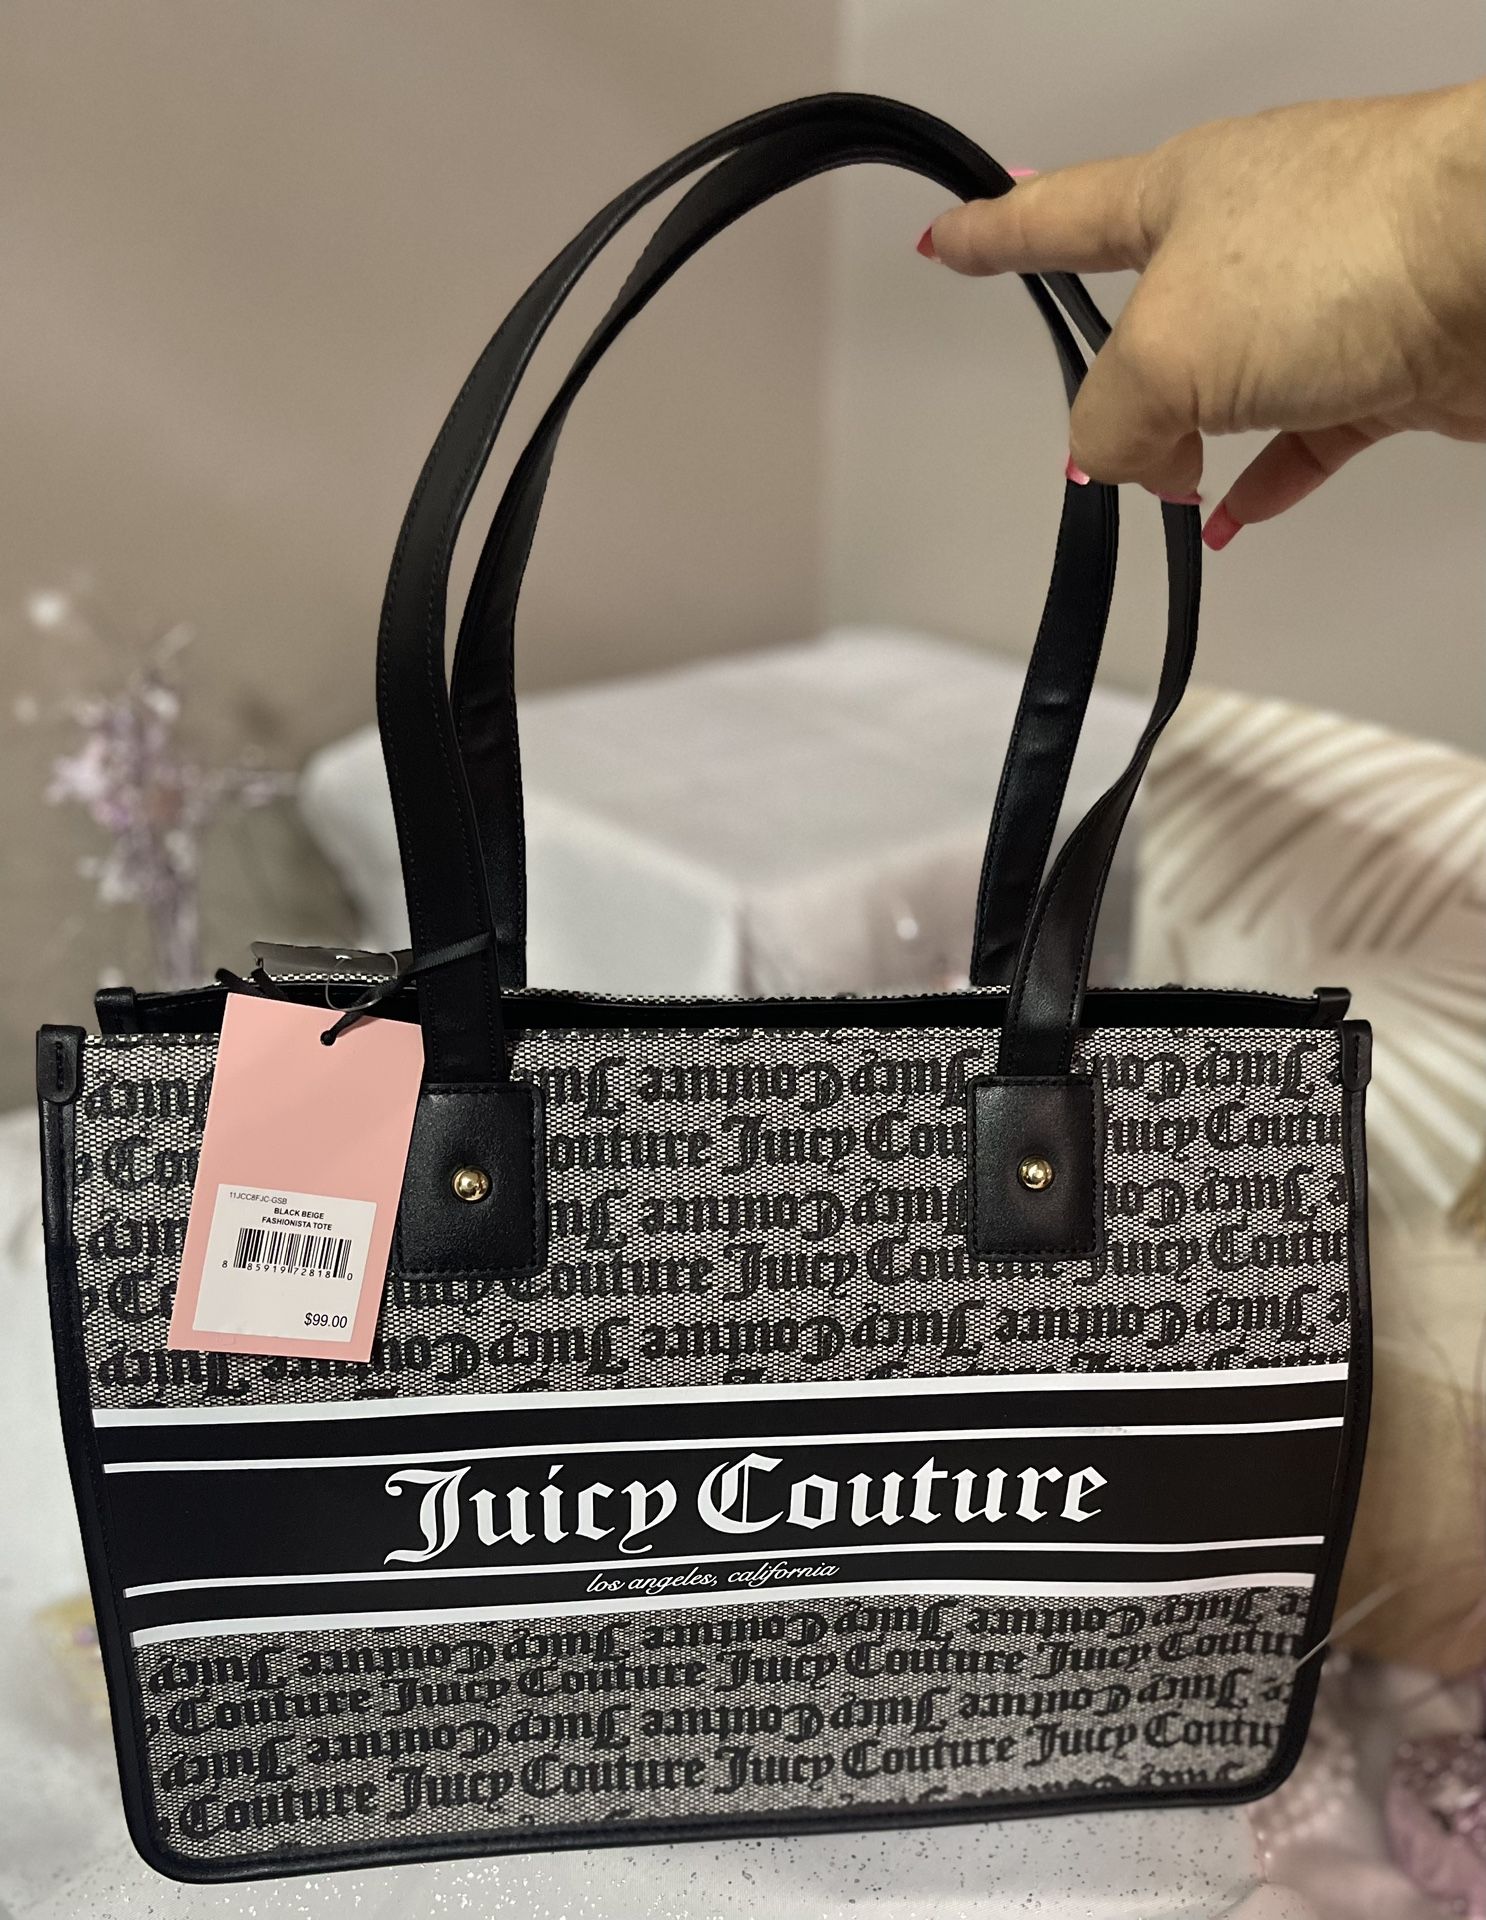 Juicy Couture Tote Bag New